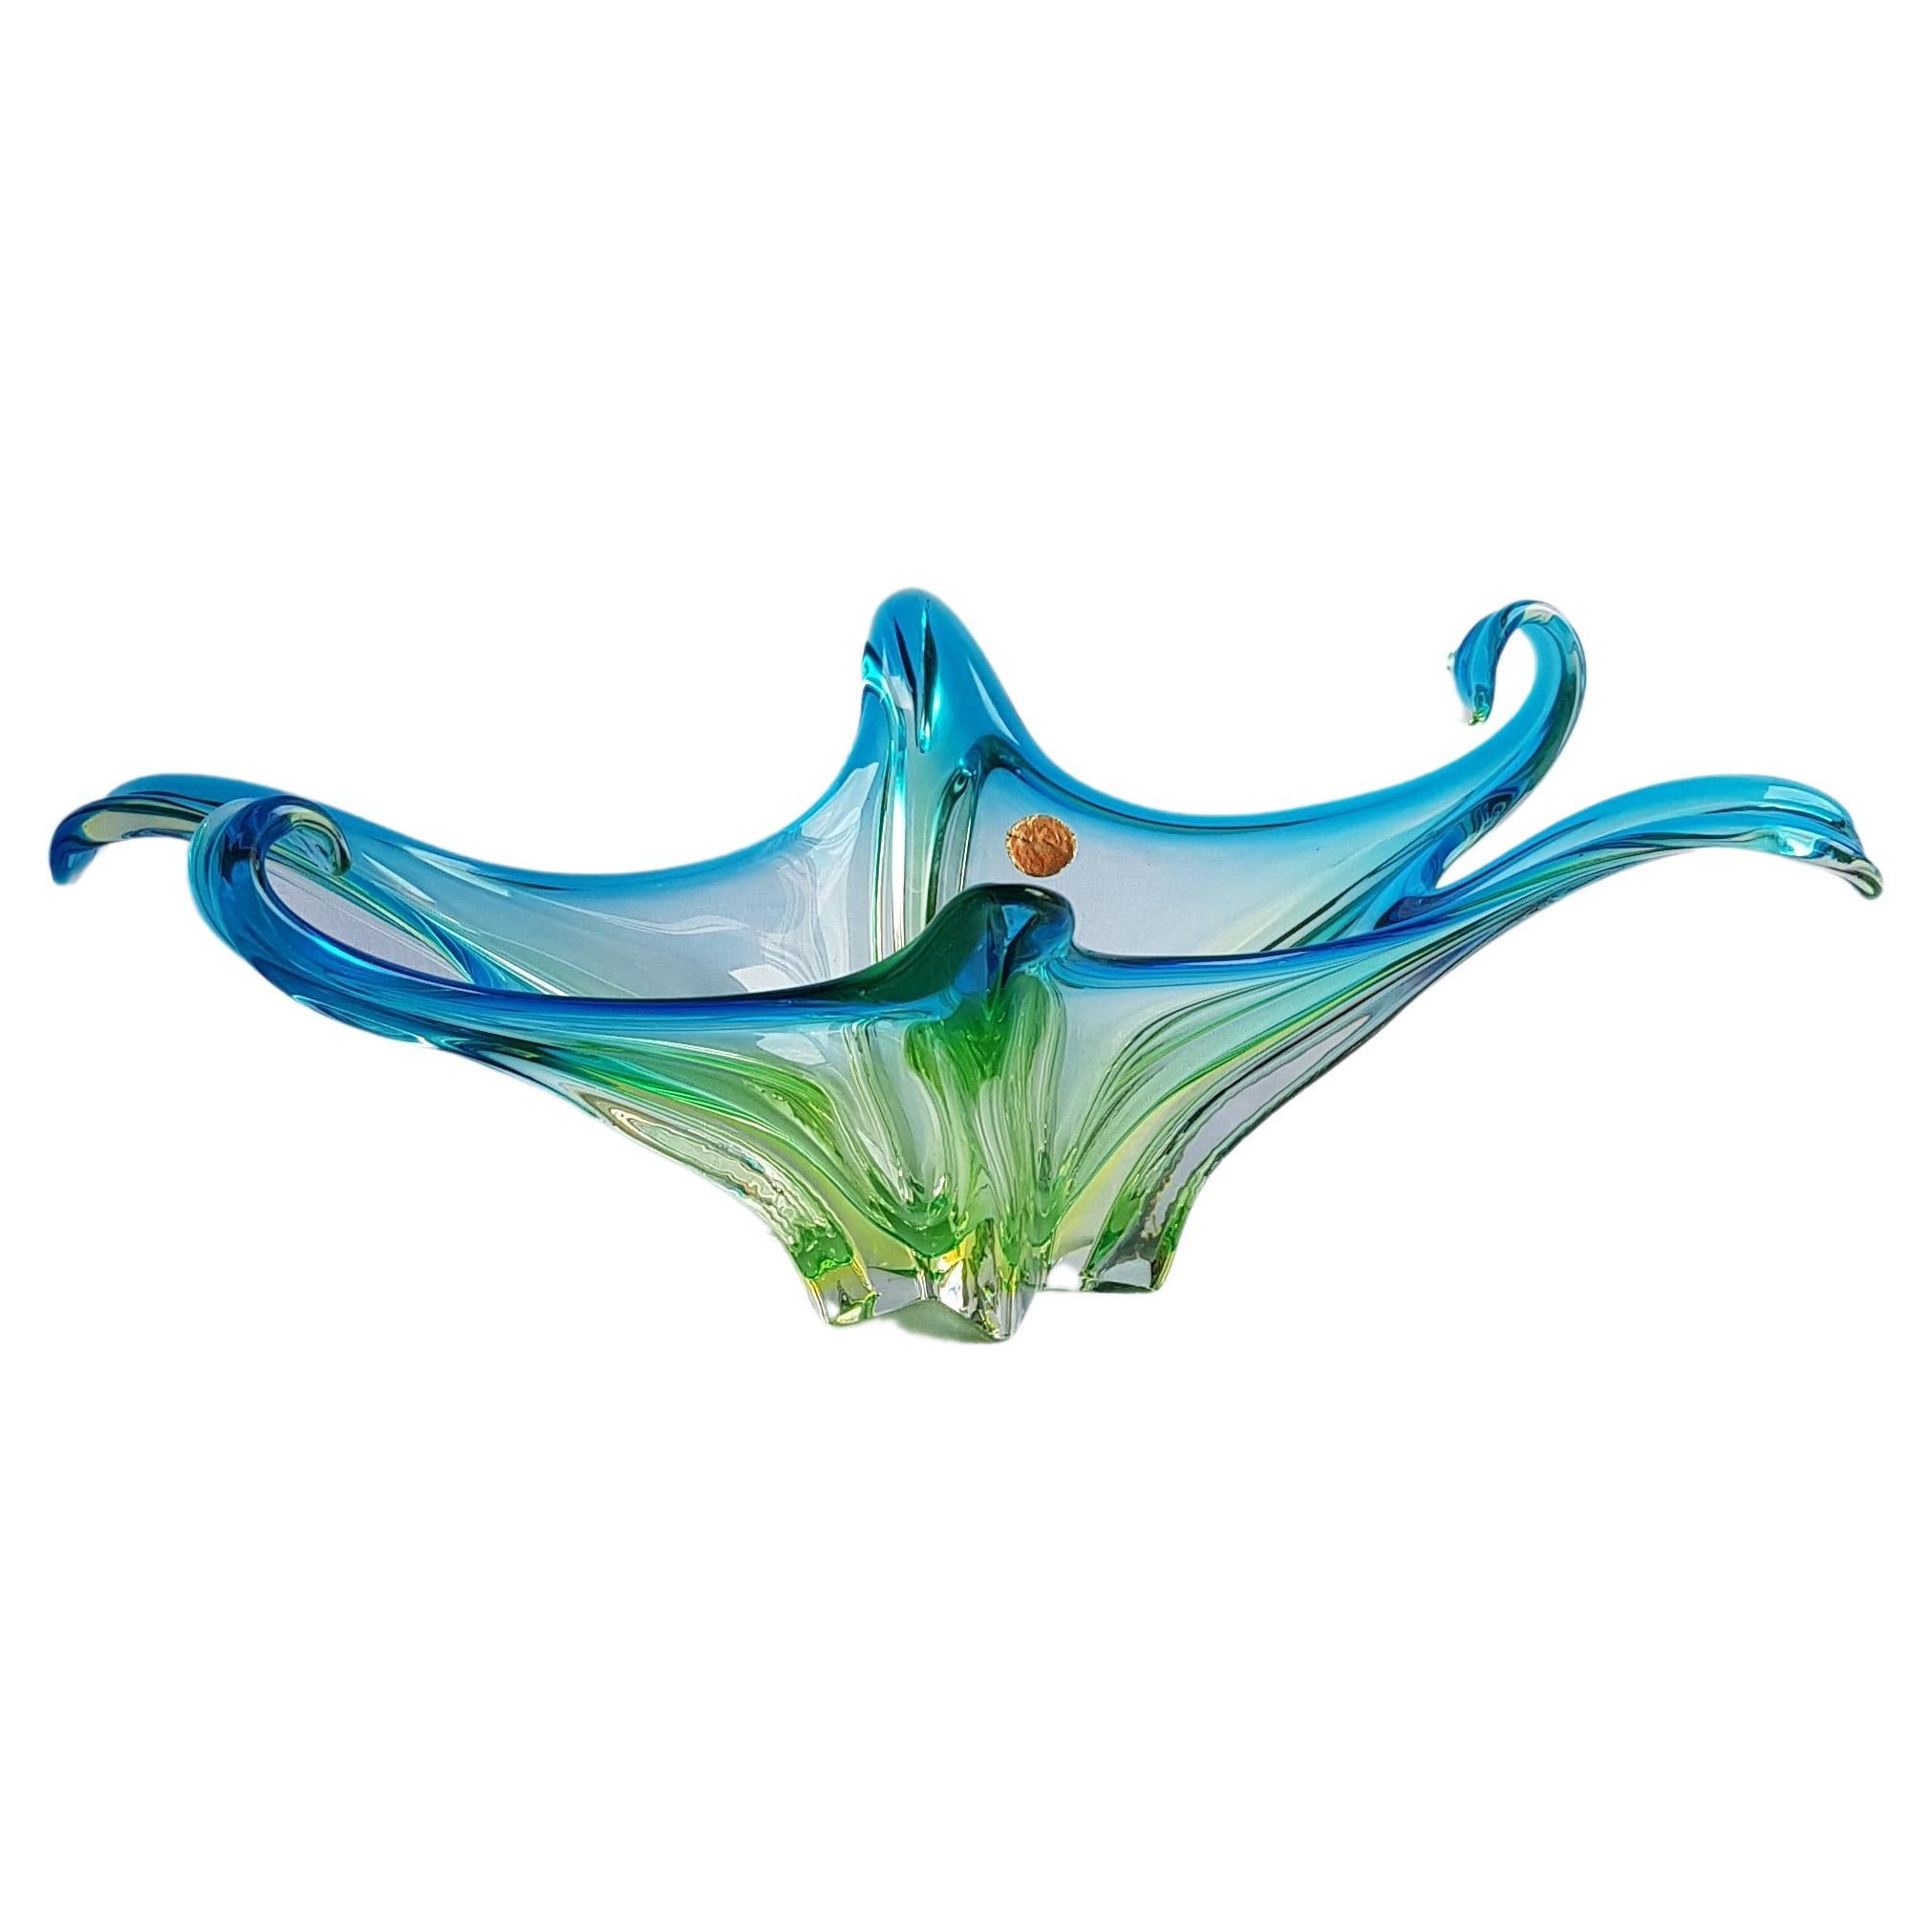 Middle of Century Extralarge Murano Glass Somerso Uranium Centerpiece For Sale